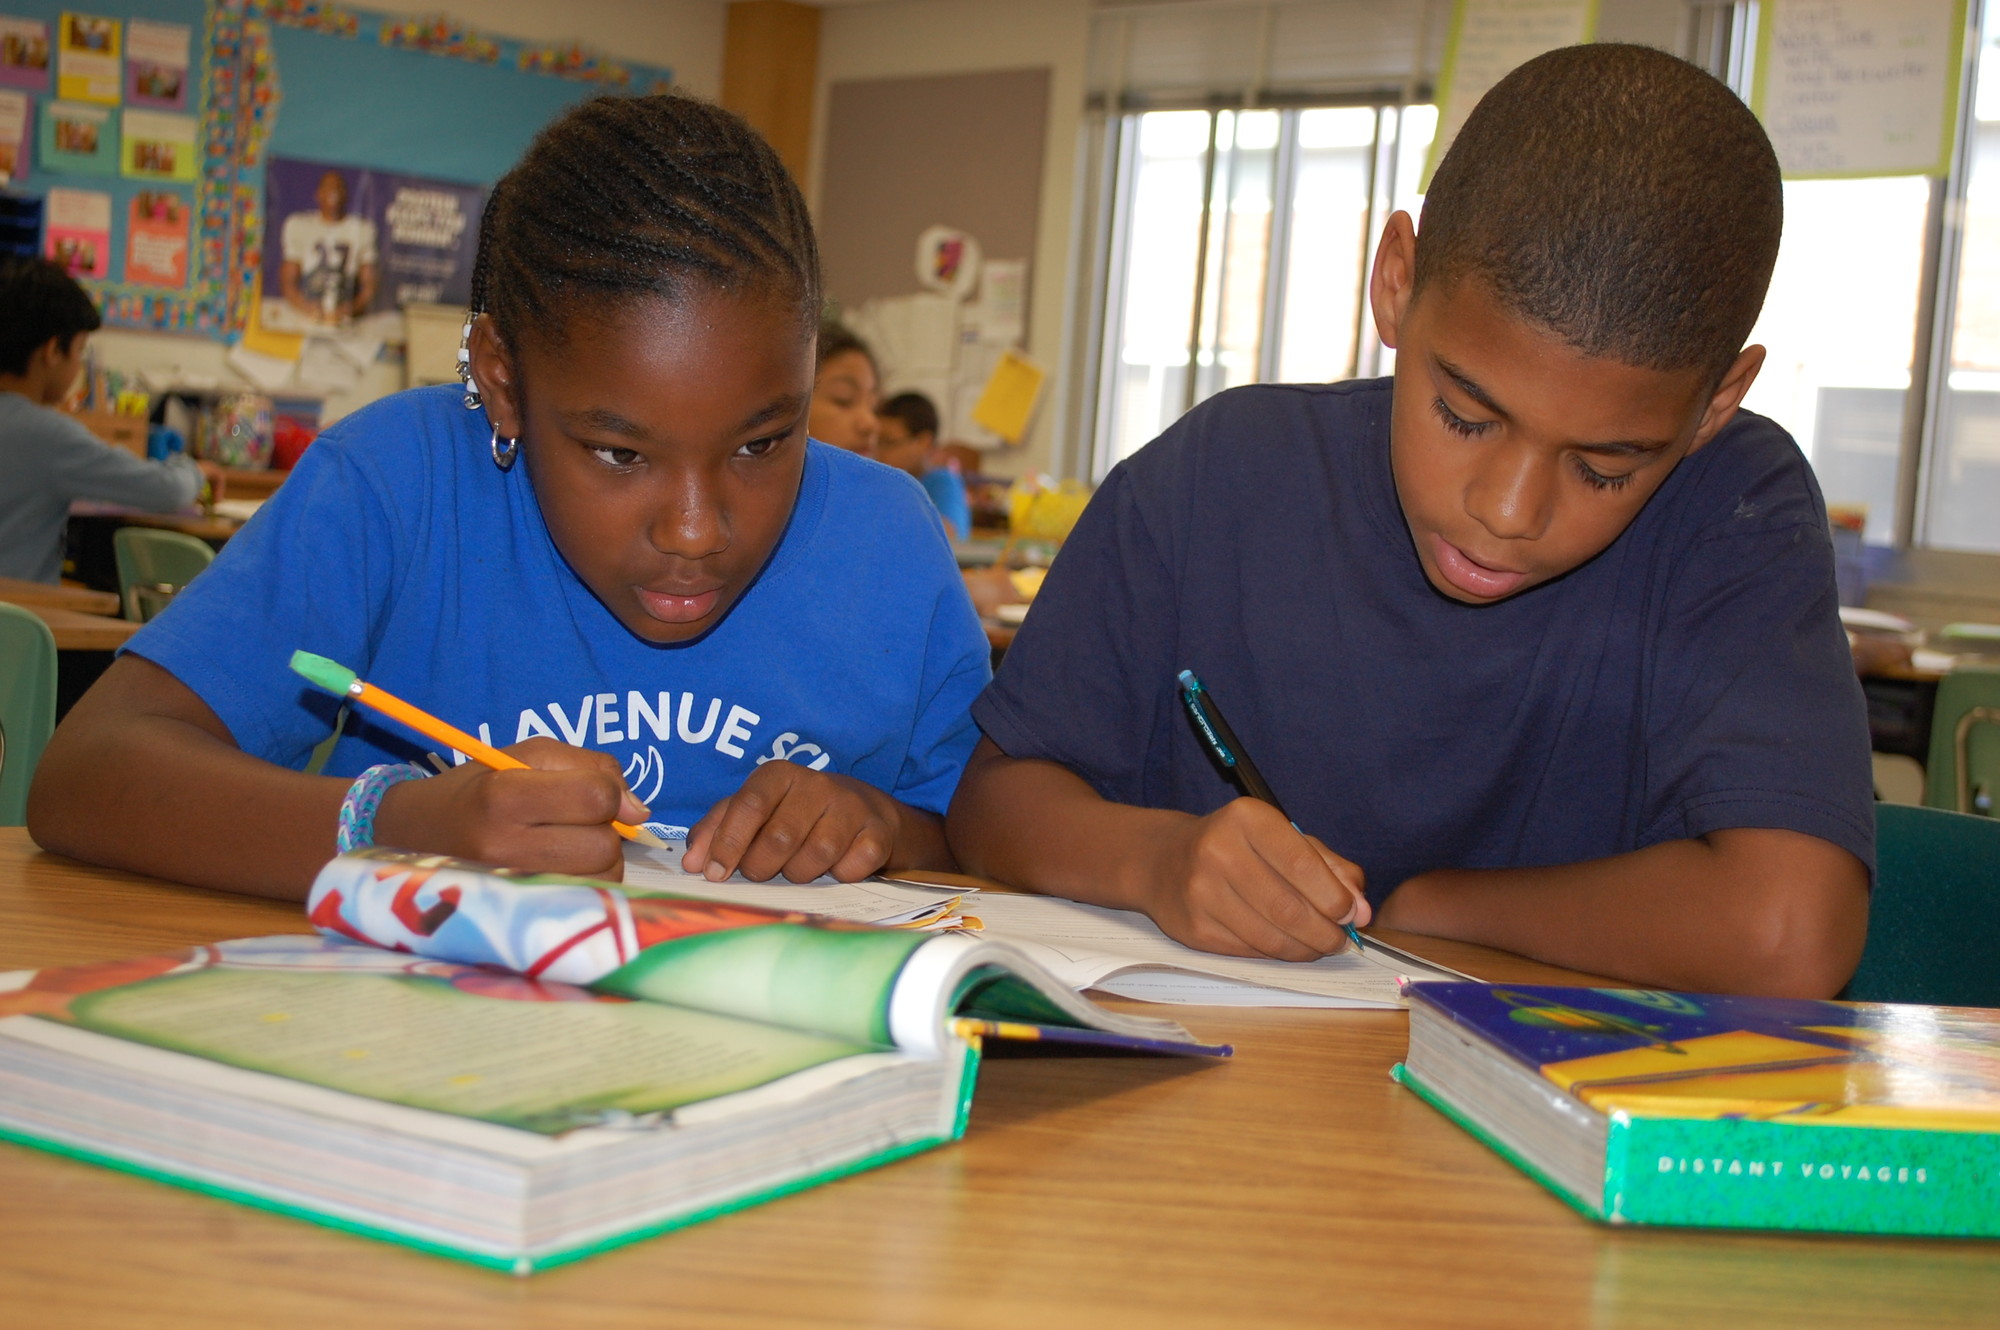 Fifth-graders Jade Jacques, left, and Justice Byrd were hard at work on Sept. 25, ensuring that the school keeps up its tradition of academic excellence.